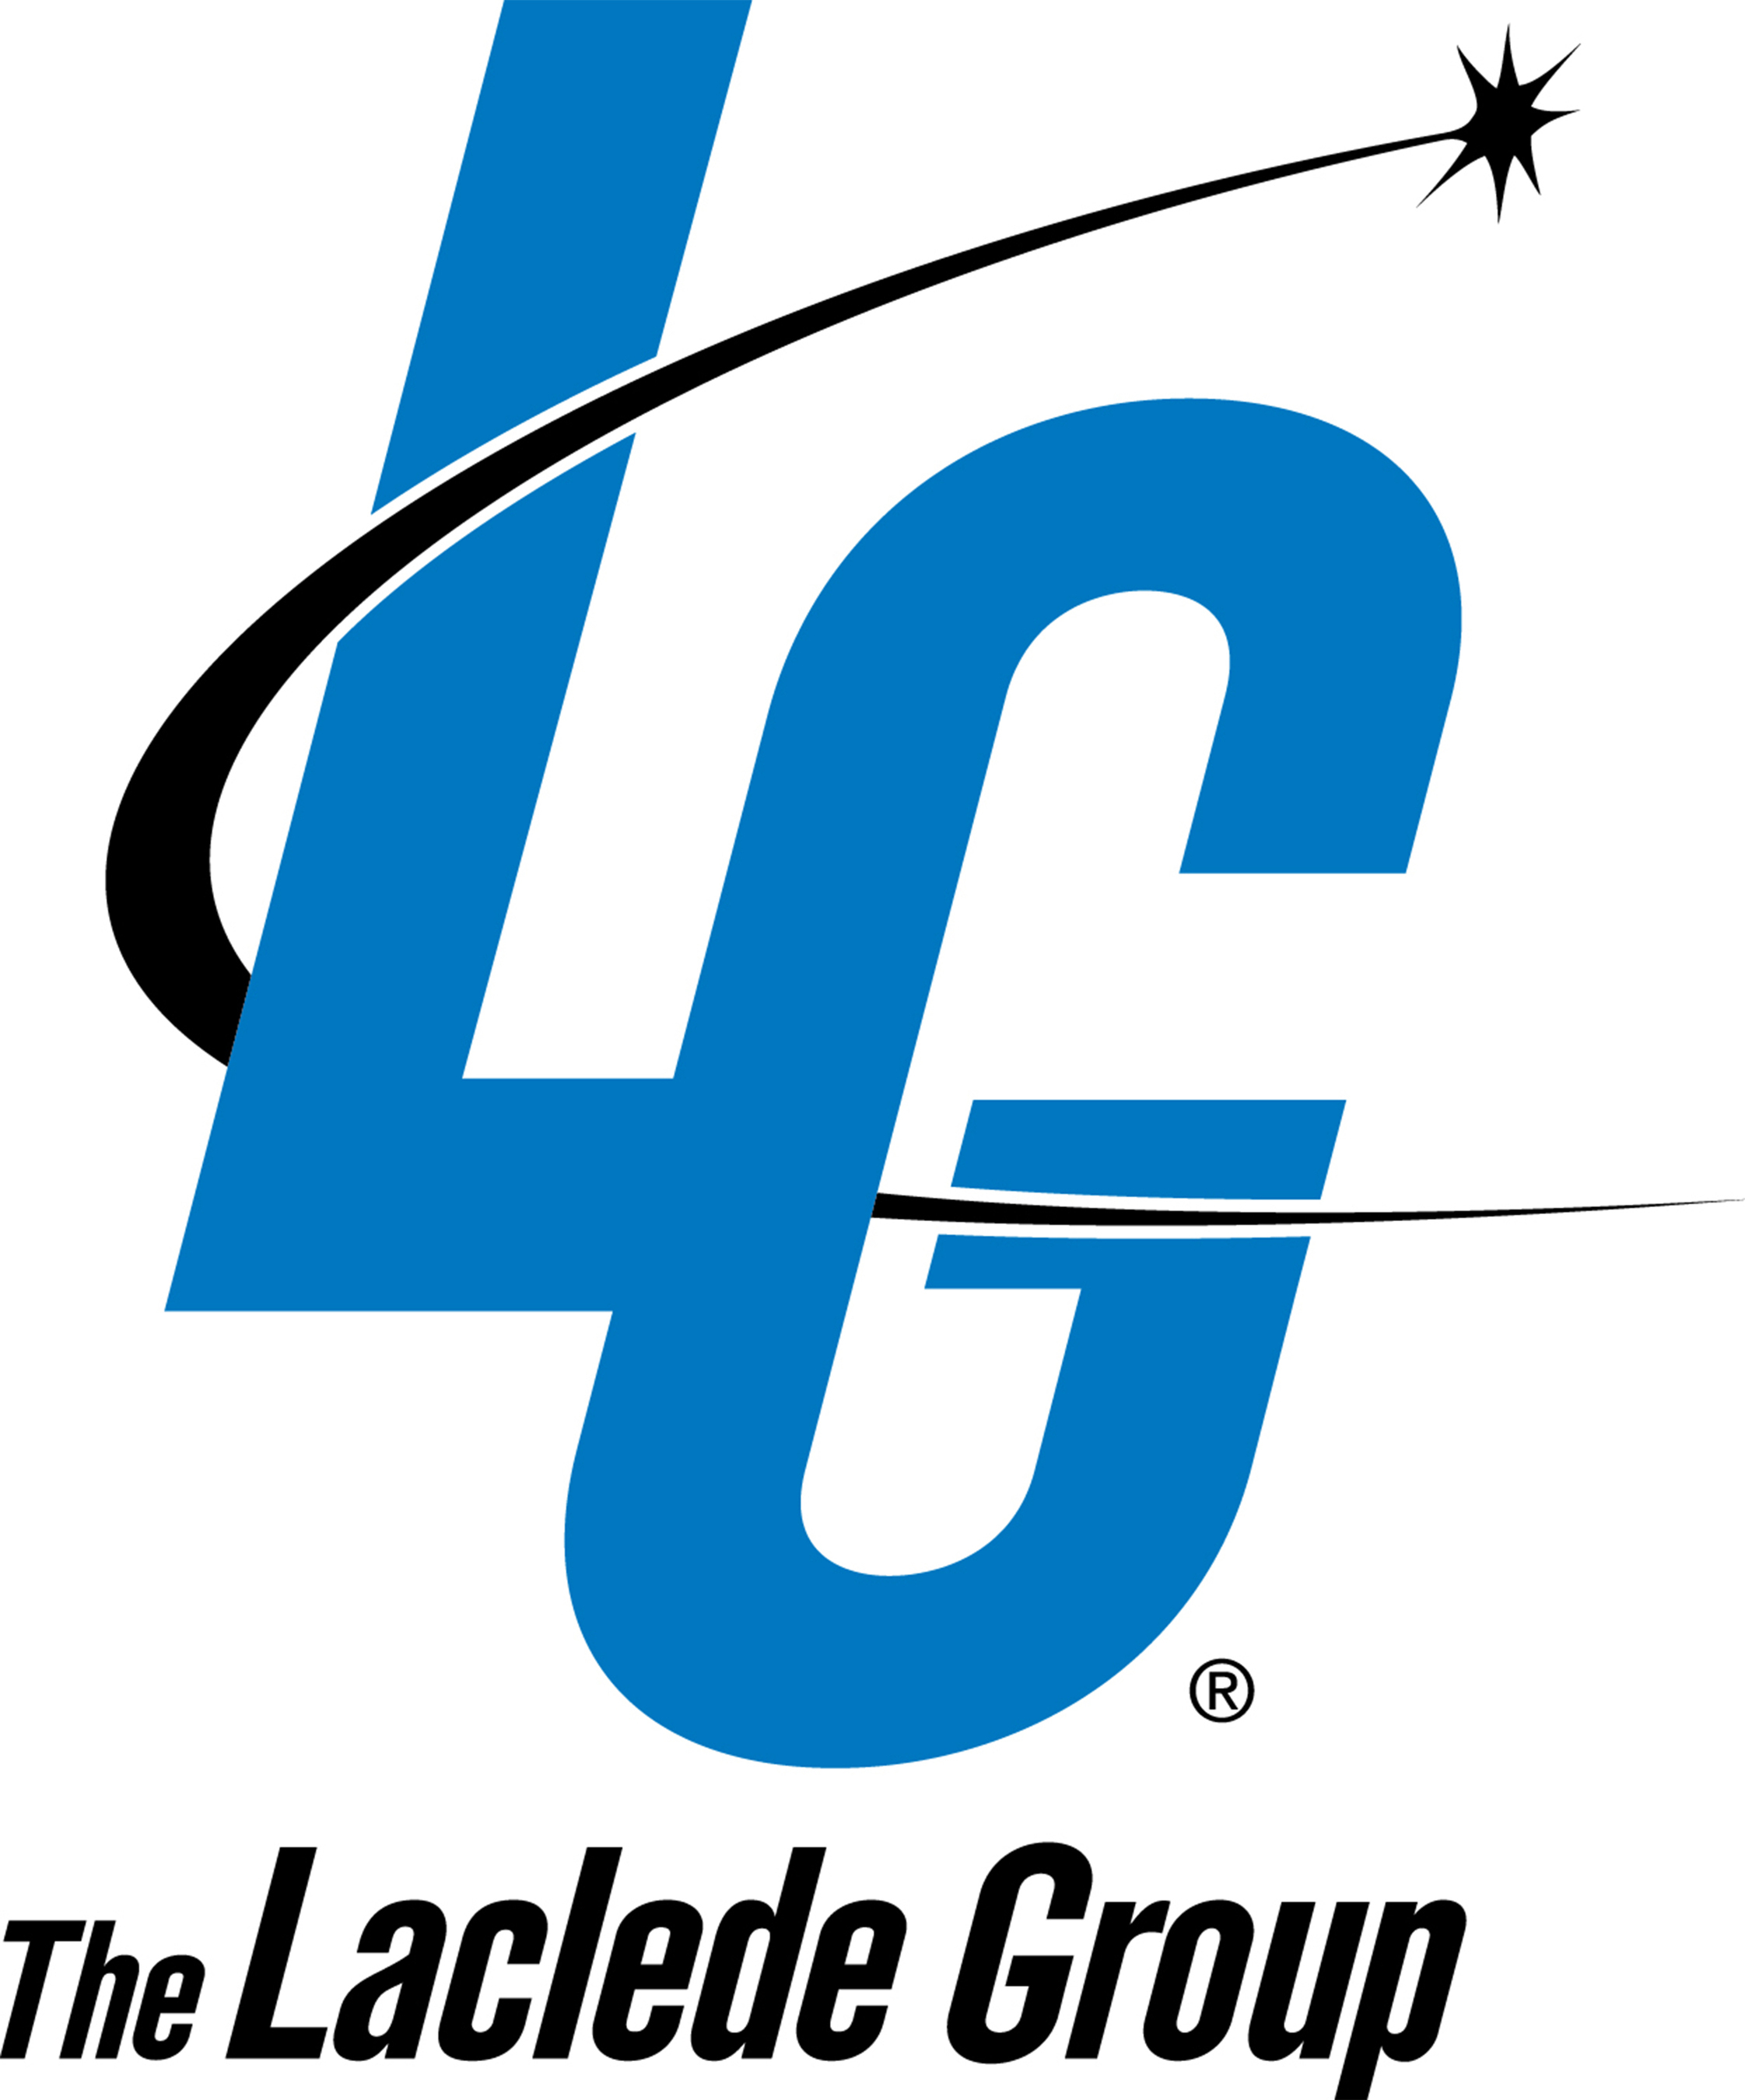 The Laclede Group, Inc. (PRNewsFoto/The Laclede Group, Inc. ) (PRNewsFoto/The Laclede Group, Inc.)